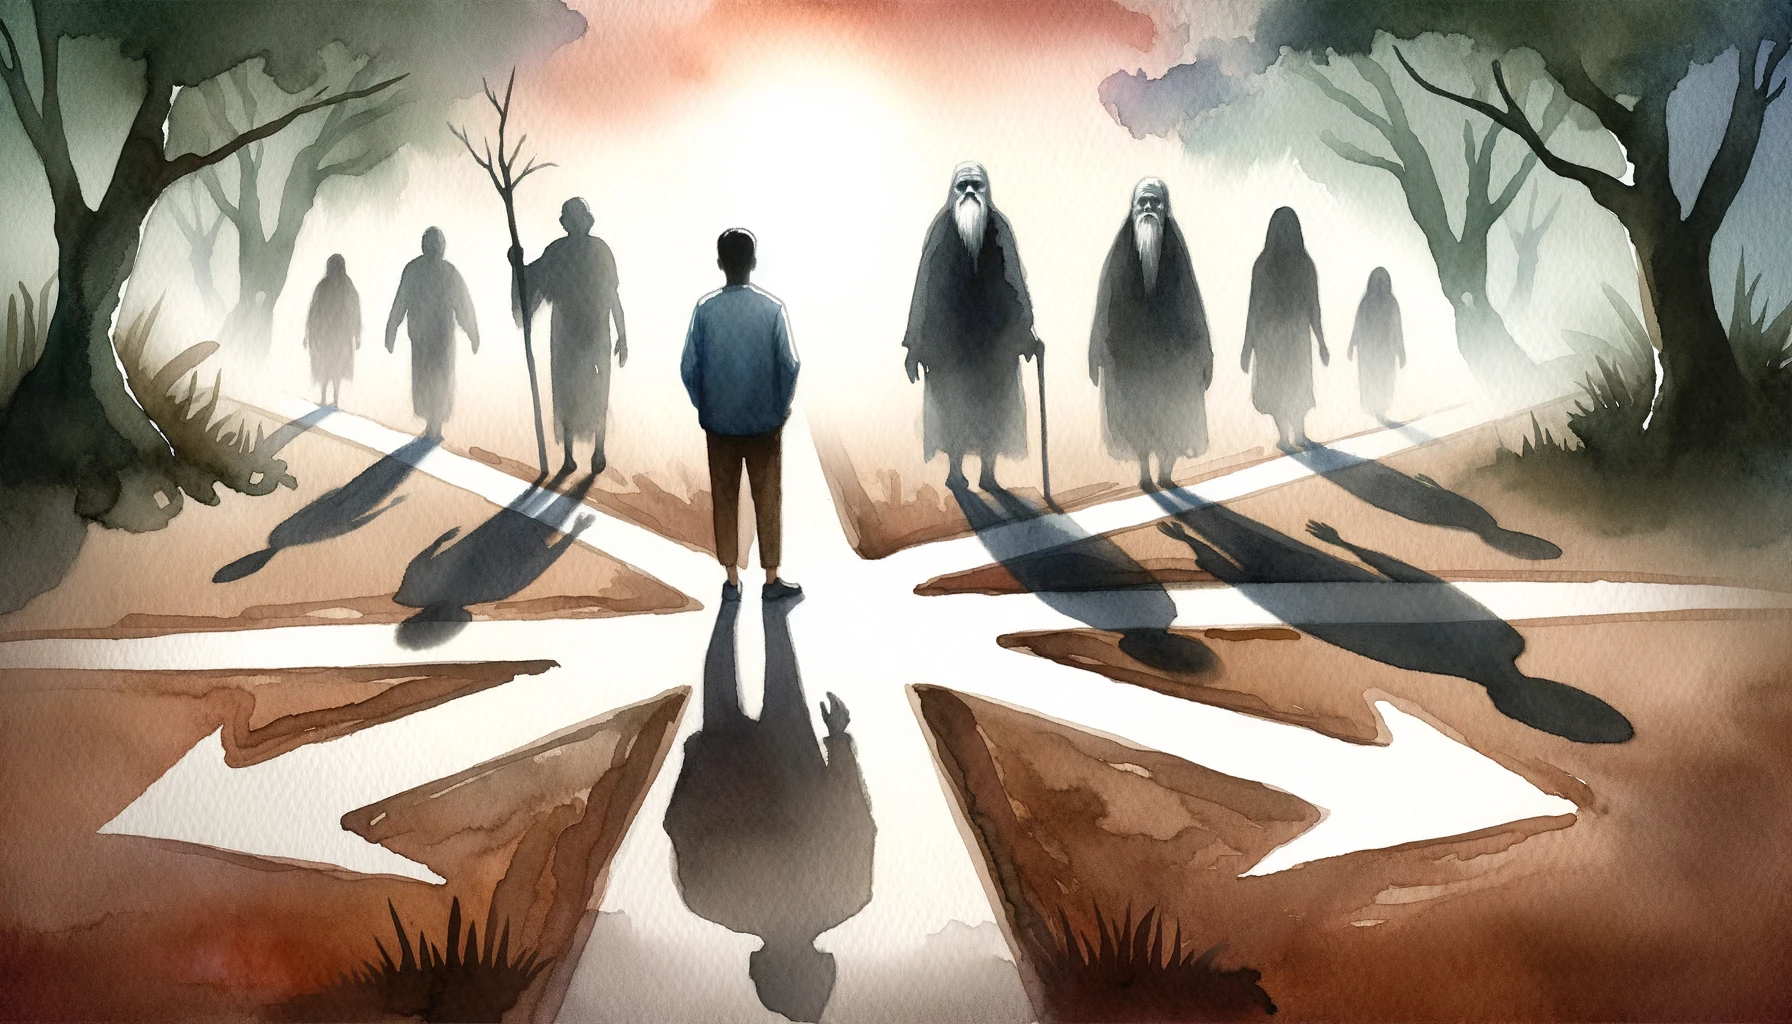 Person standing at a crossroads, with shadowy figures of ancestors behind them, representing the influence of past generations on current choices and challenges.